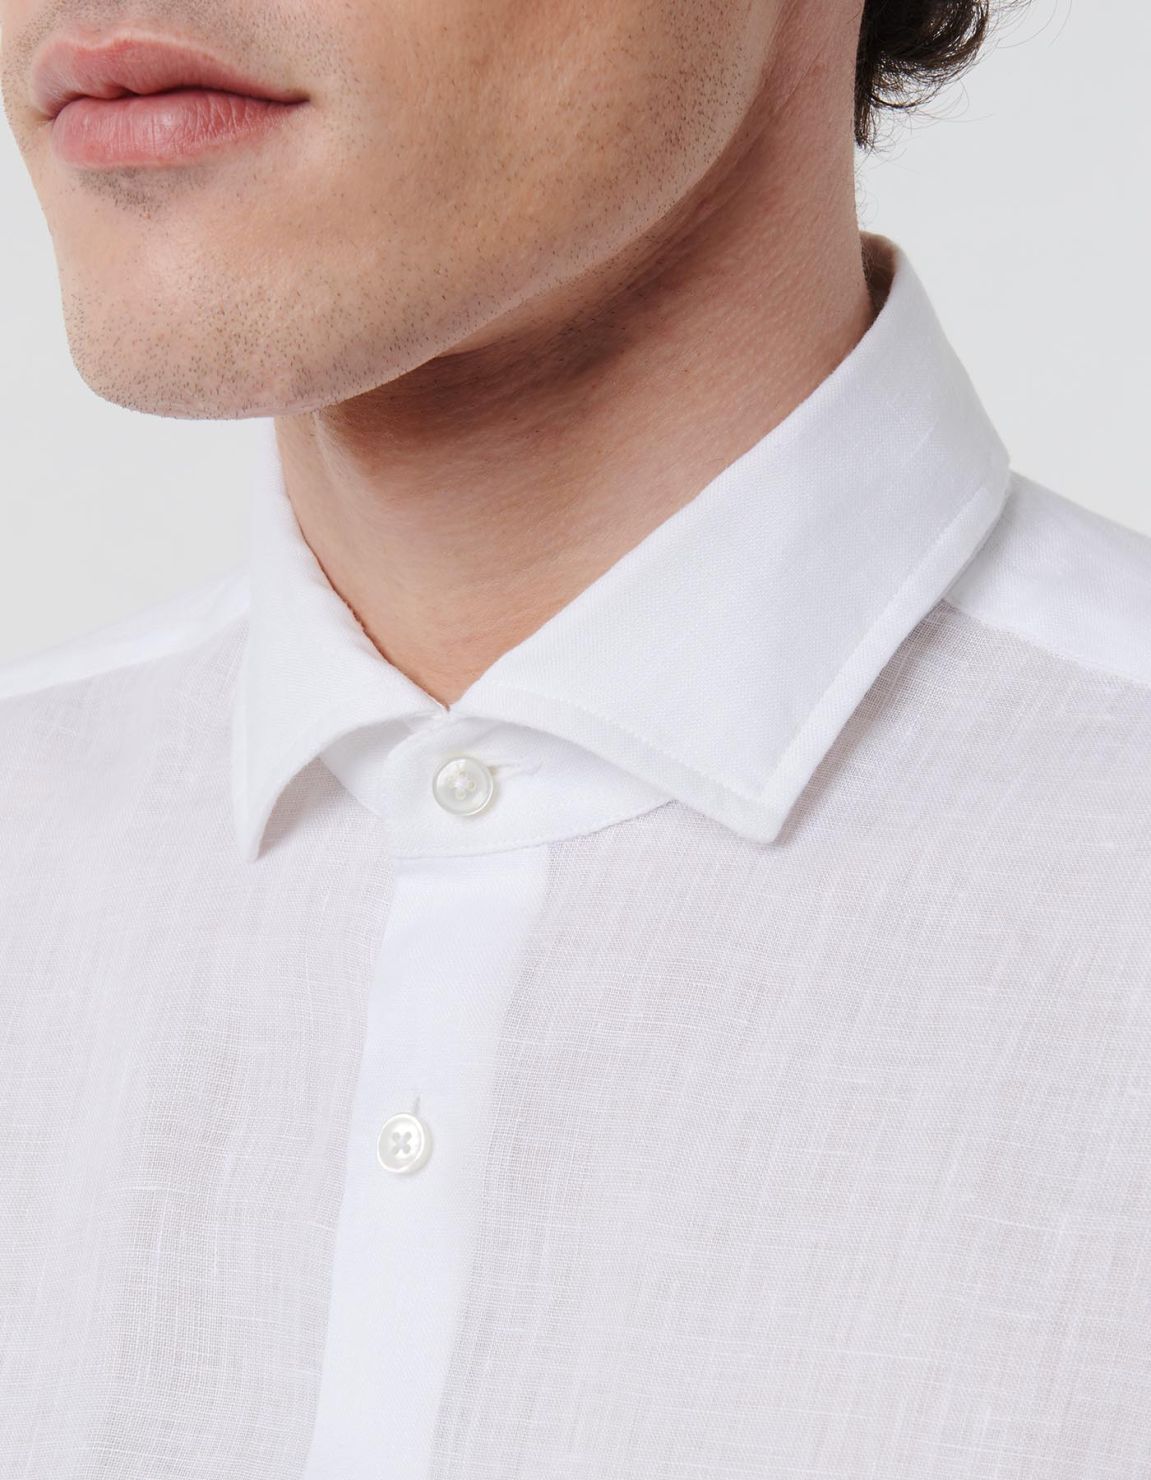 White Linen Solid colour Shirt Collar small cutaway Tailor Custom Fit 2